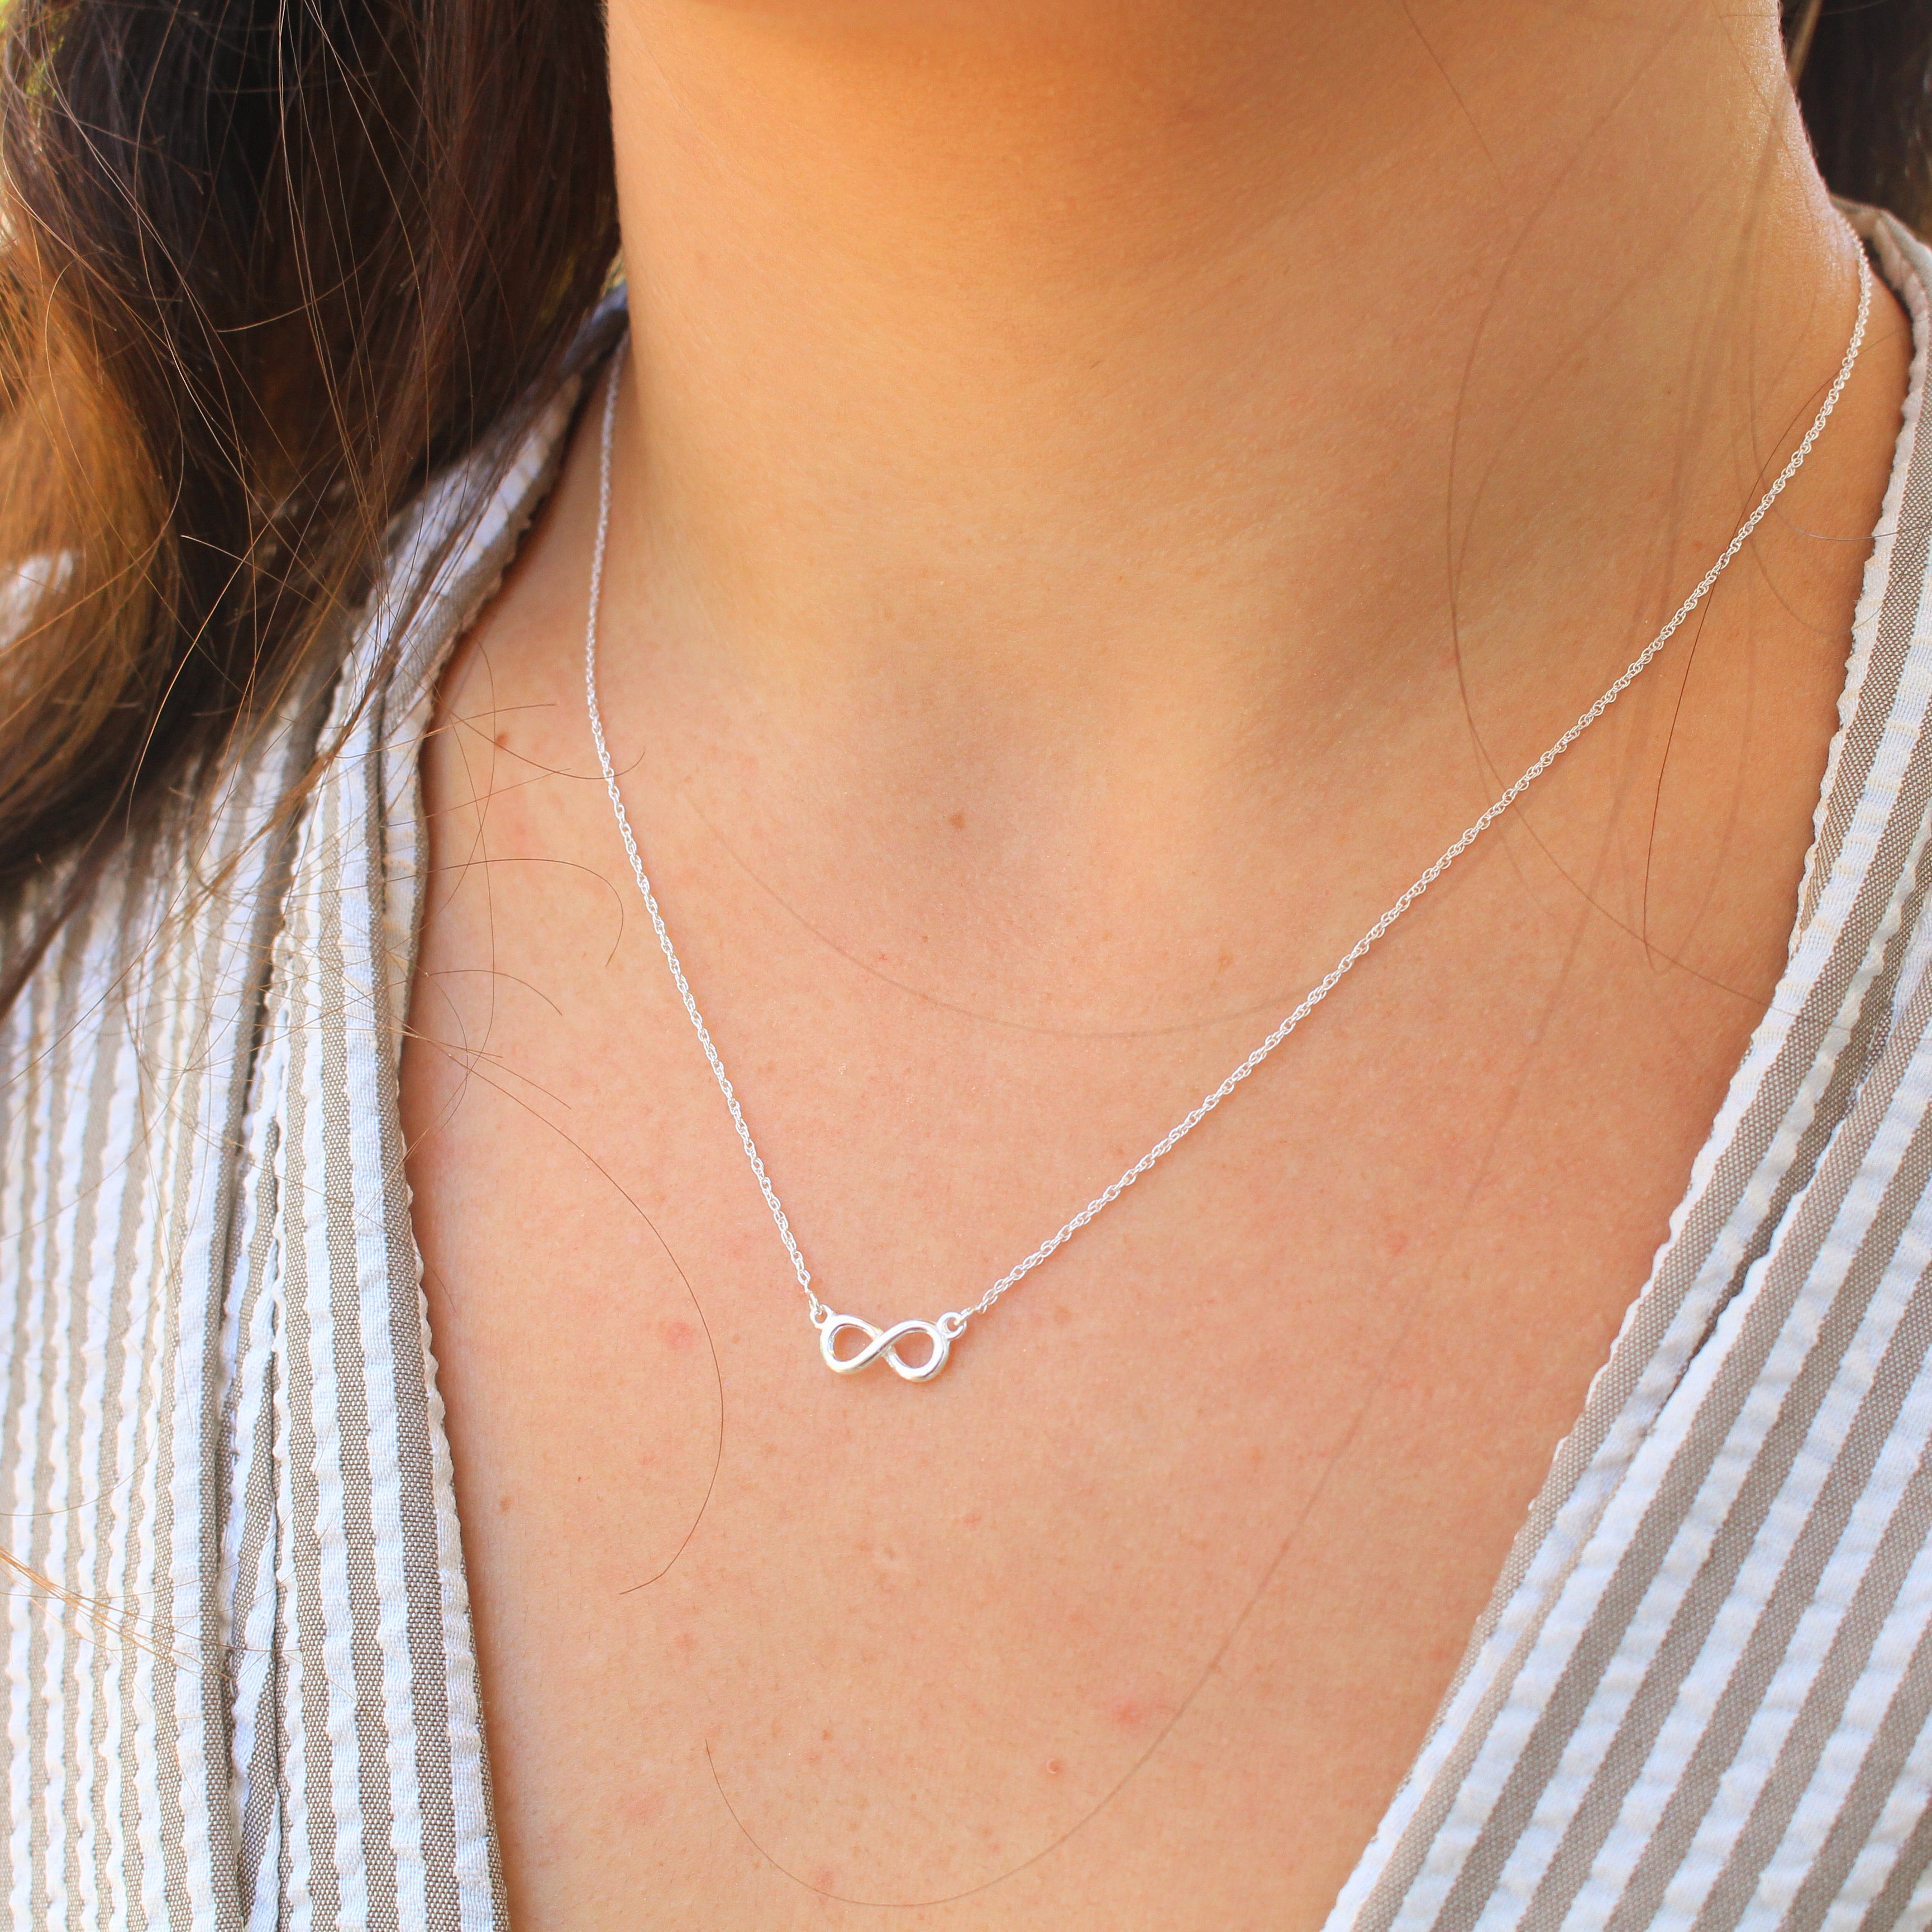 Rare Petite Infinity Necklace: Sterling Silver-Vigg Jewelry